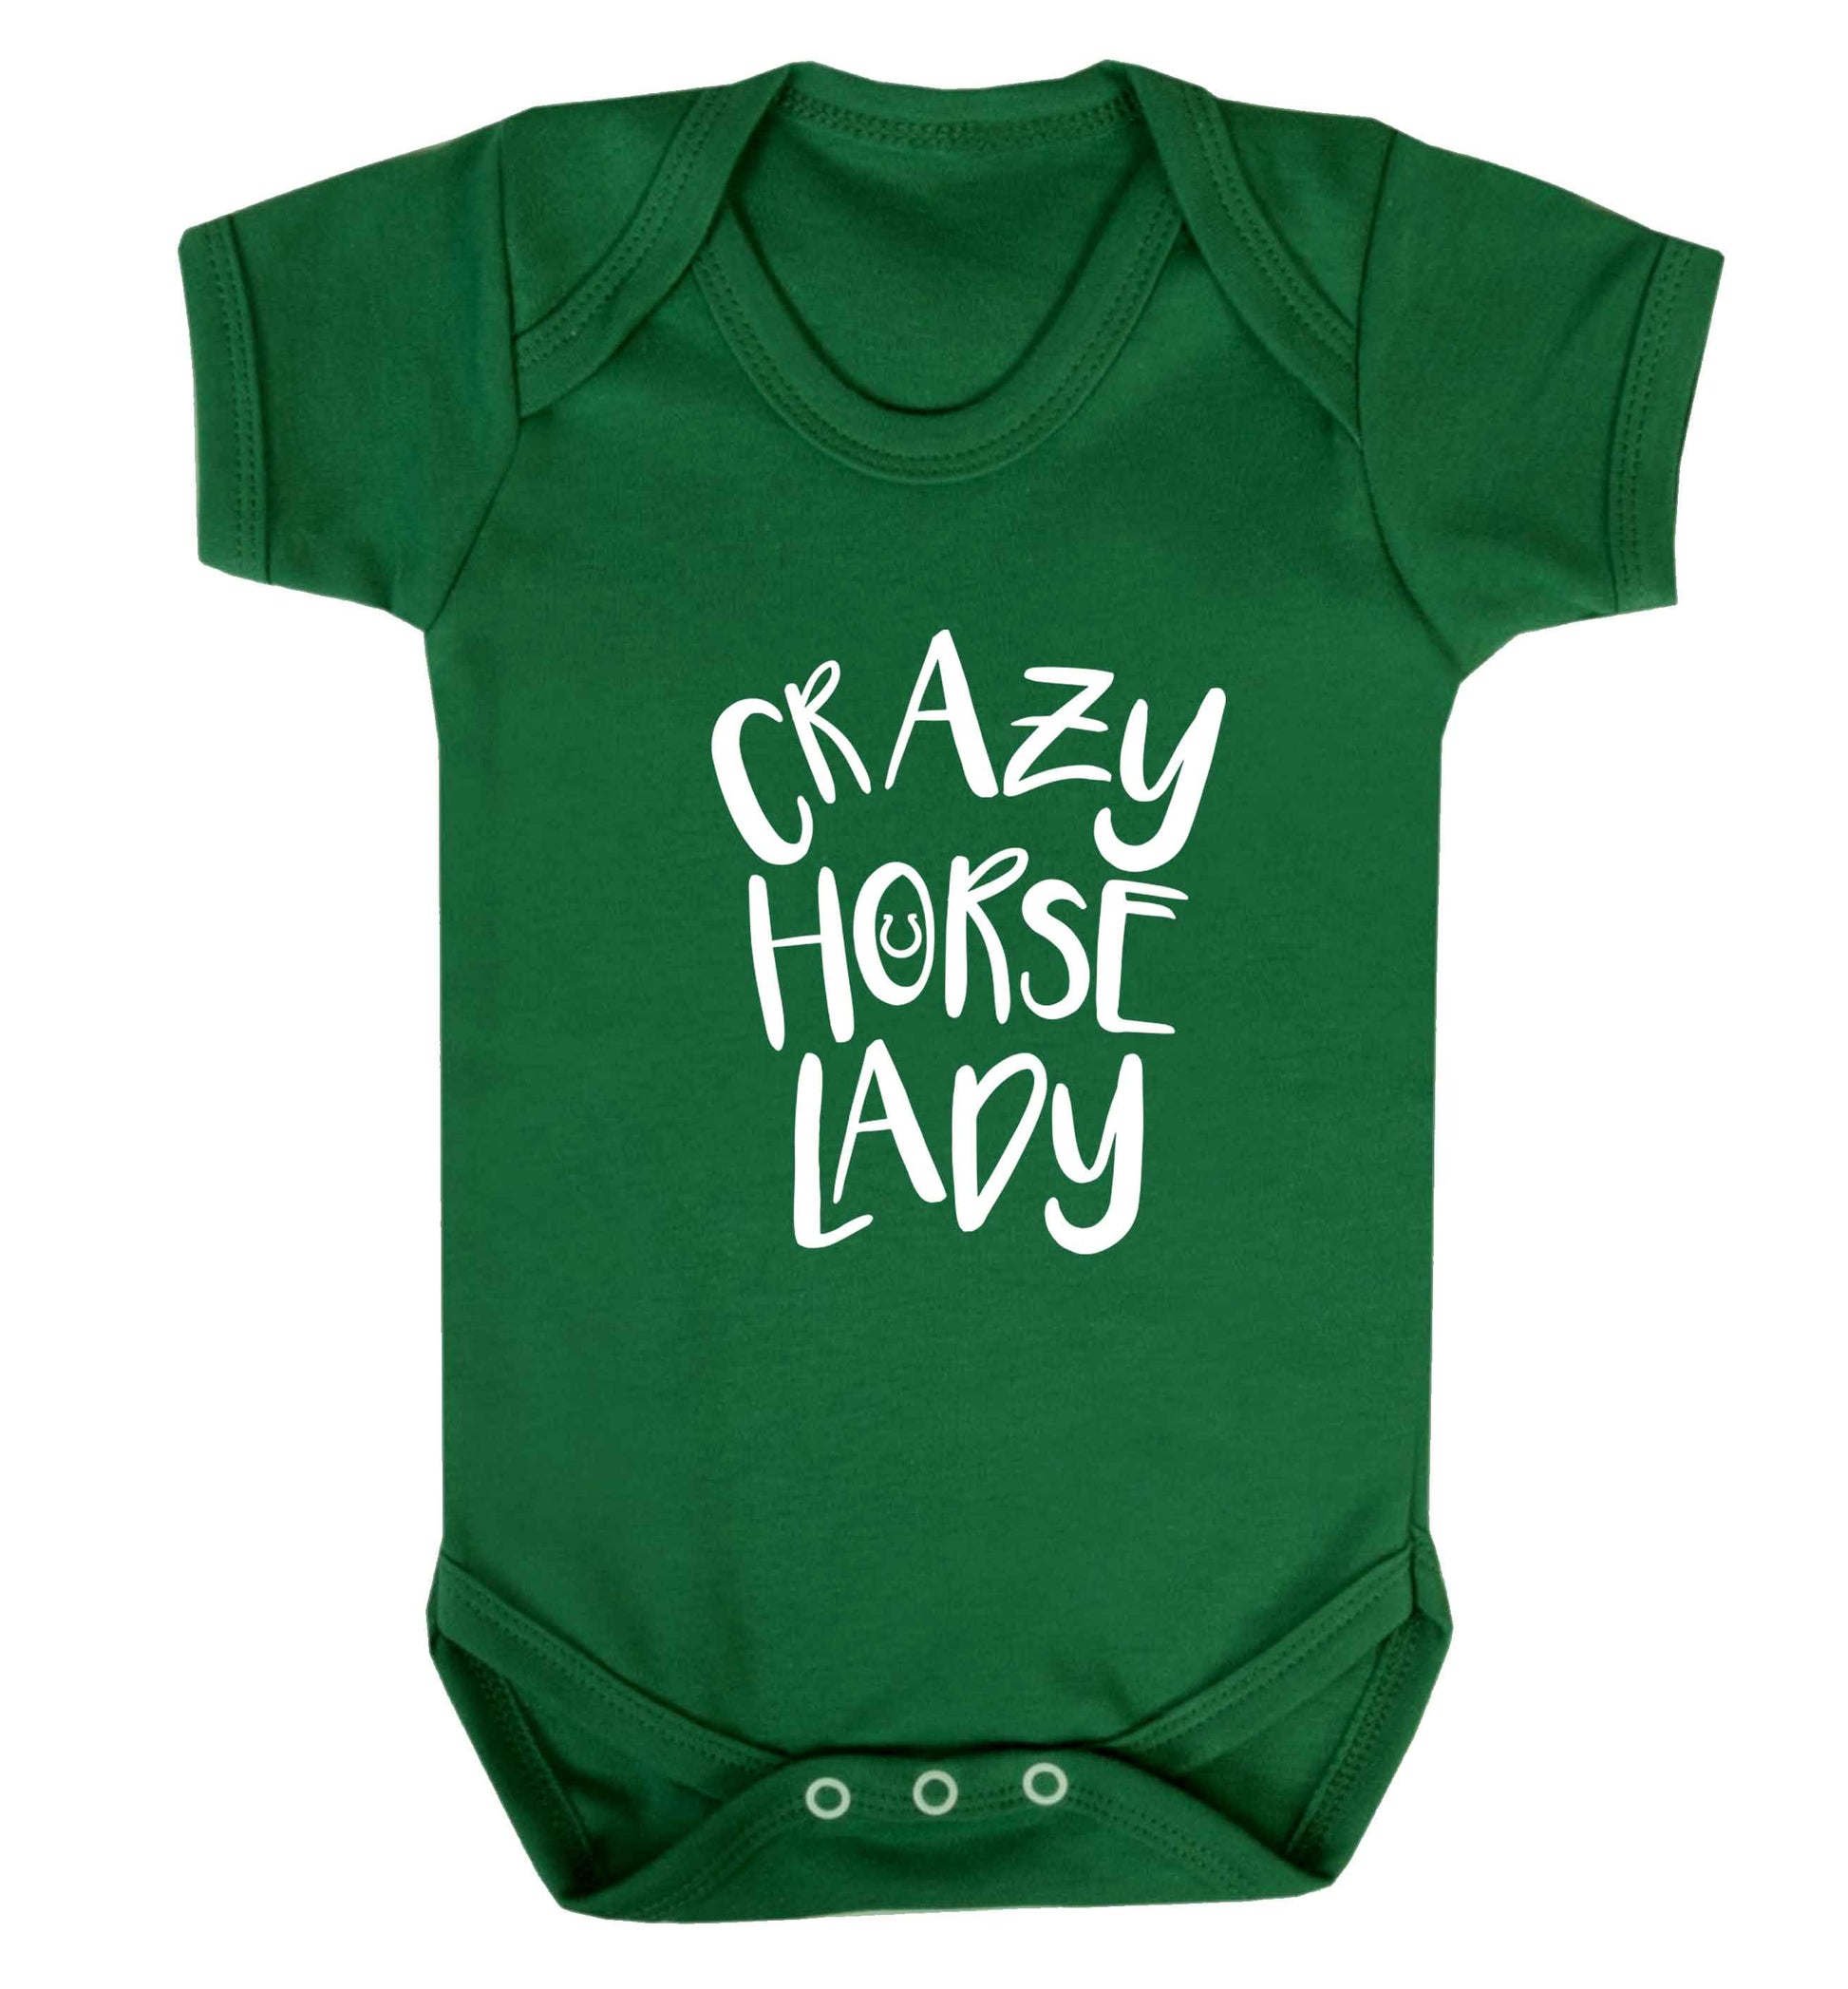 Crazy horse lady baby vest green 18-24 months